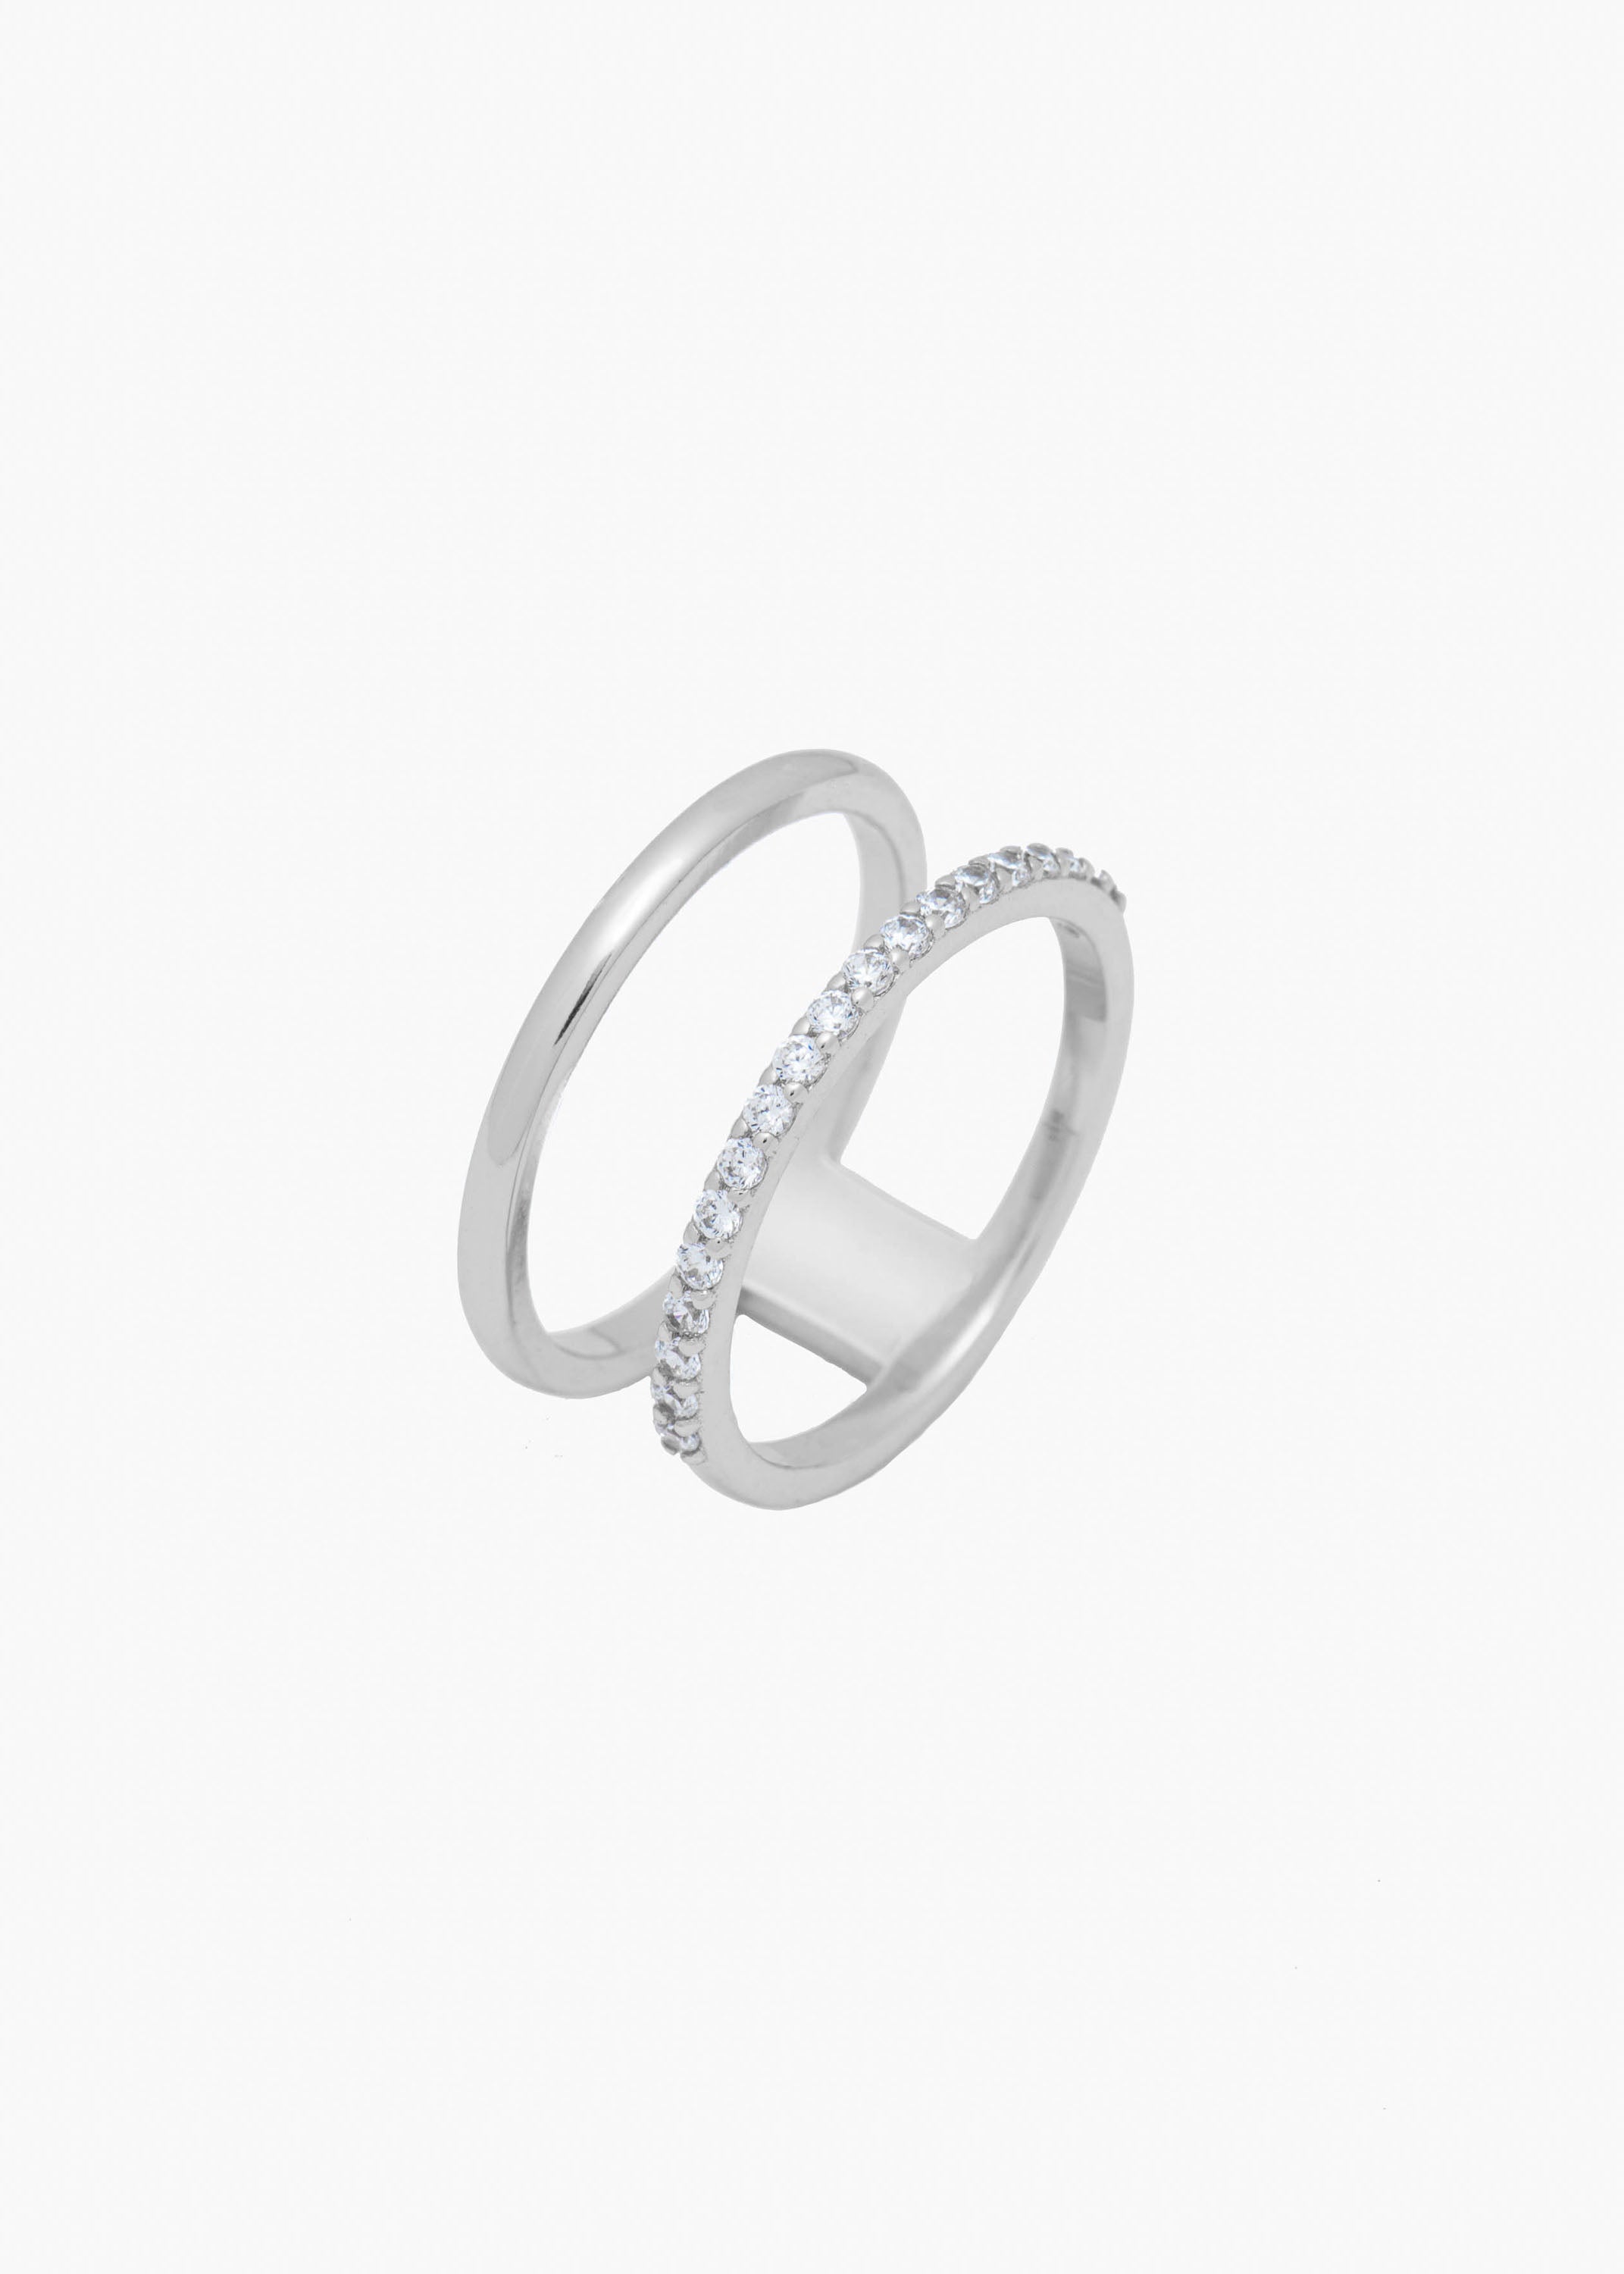 Double Band Ring Sterling Silver Ring Knuckle Ring Adjustable Ring Modern  Open — Discovered